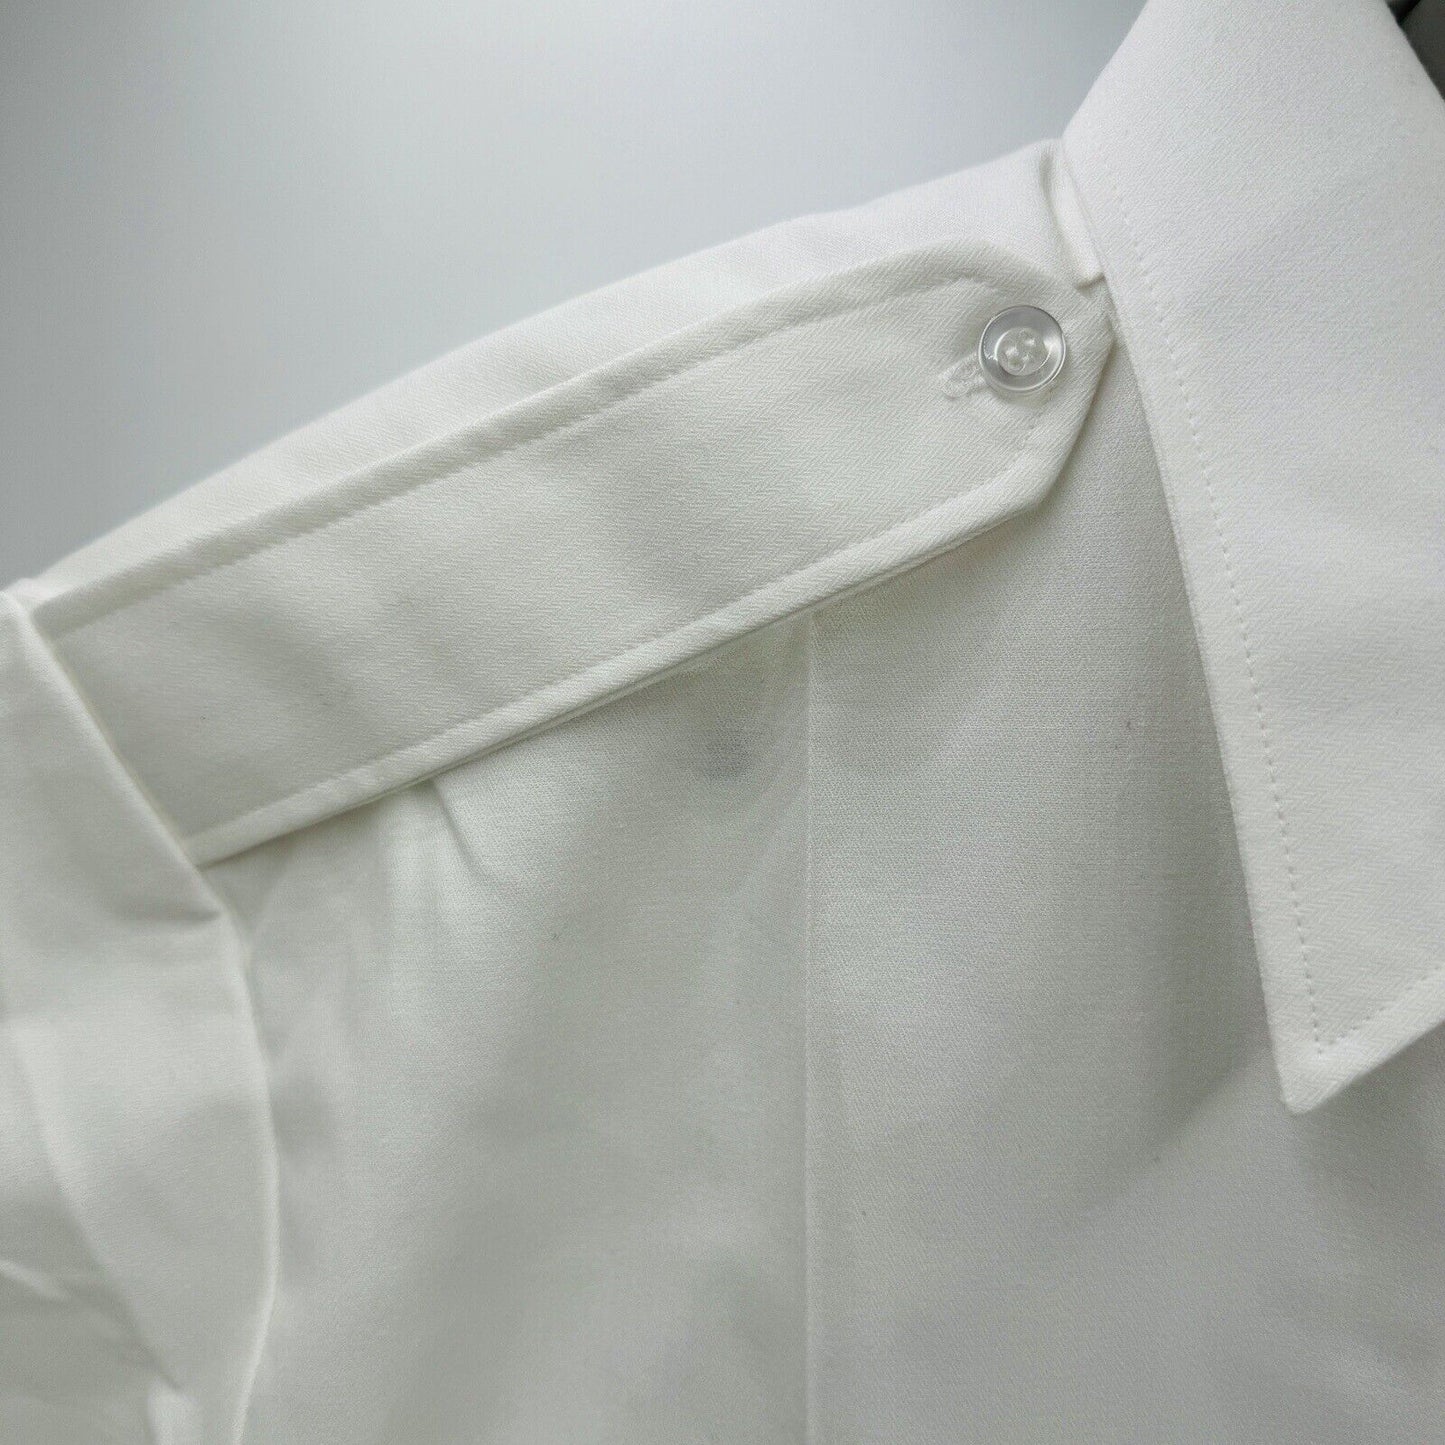 NEW Marlow White Shirt MEN'S TAPERED BODY SHORT SLEEVE, TYPE 1 RN#62573 Size 17